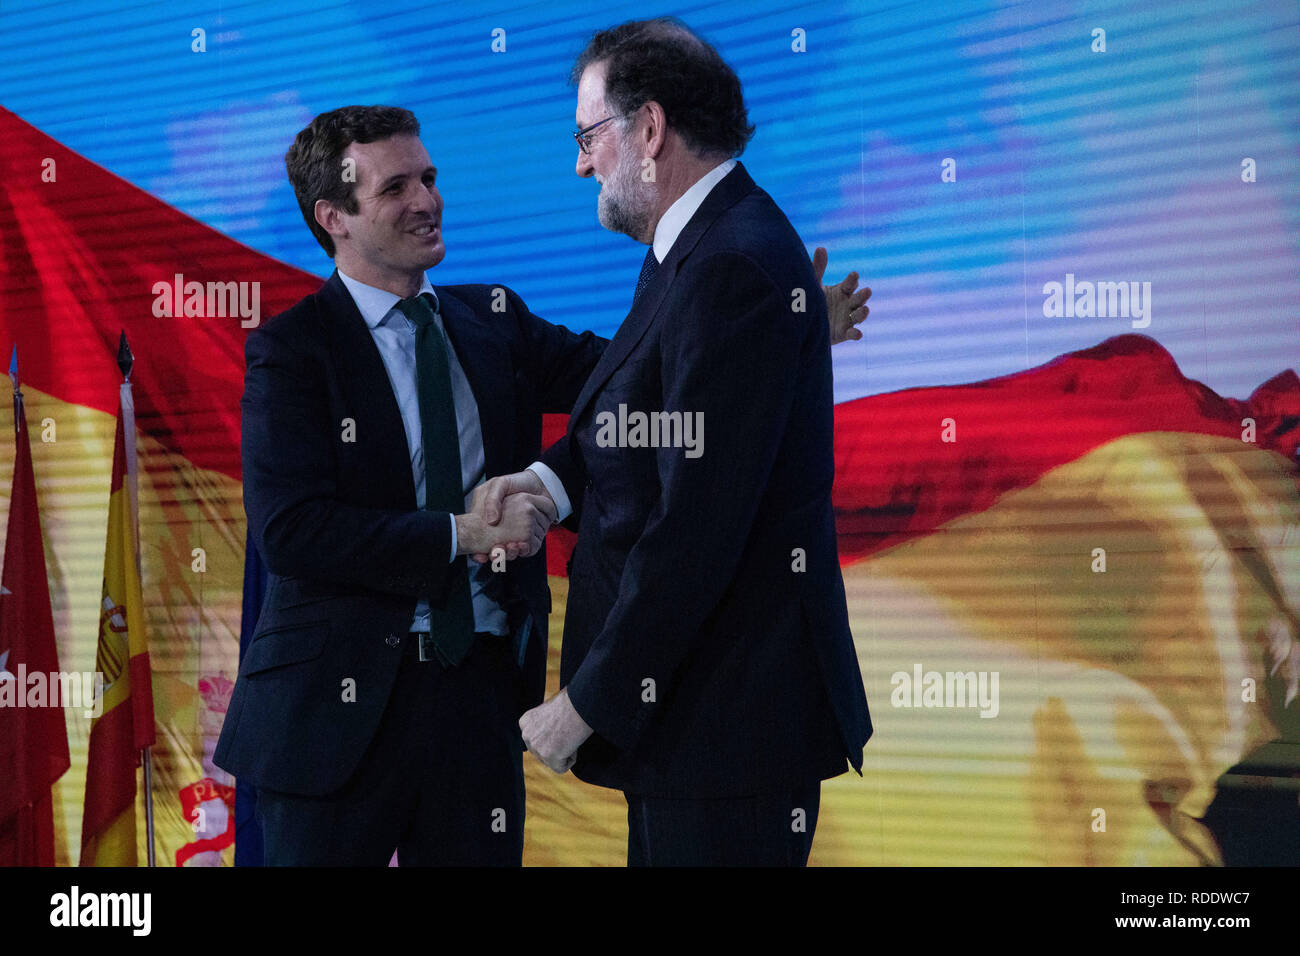 January 18, 2019 - Madrid, Spain - Pablo Casado and Mariano Rajoy at the init of the star. The PP celebrates its national convention to establish the main lines of its electoral program for the three elections scheduled for May 26 and are key to gauge the leadership of the popular president, Pablo Casado. (Credit Image: © Jesus Hellin/ZUMA Wire) Stock Photo